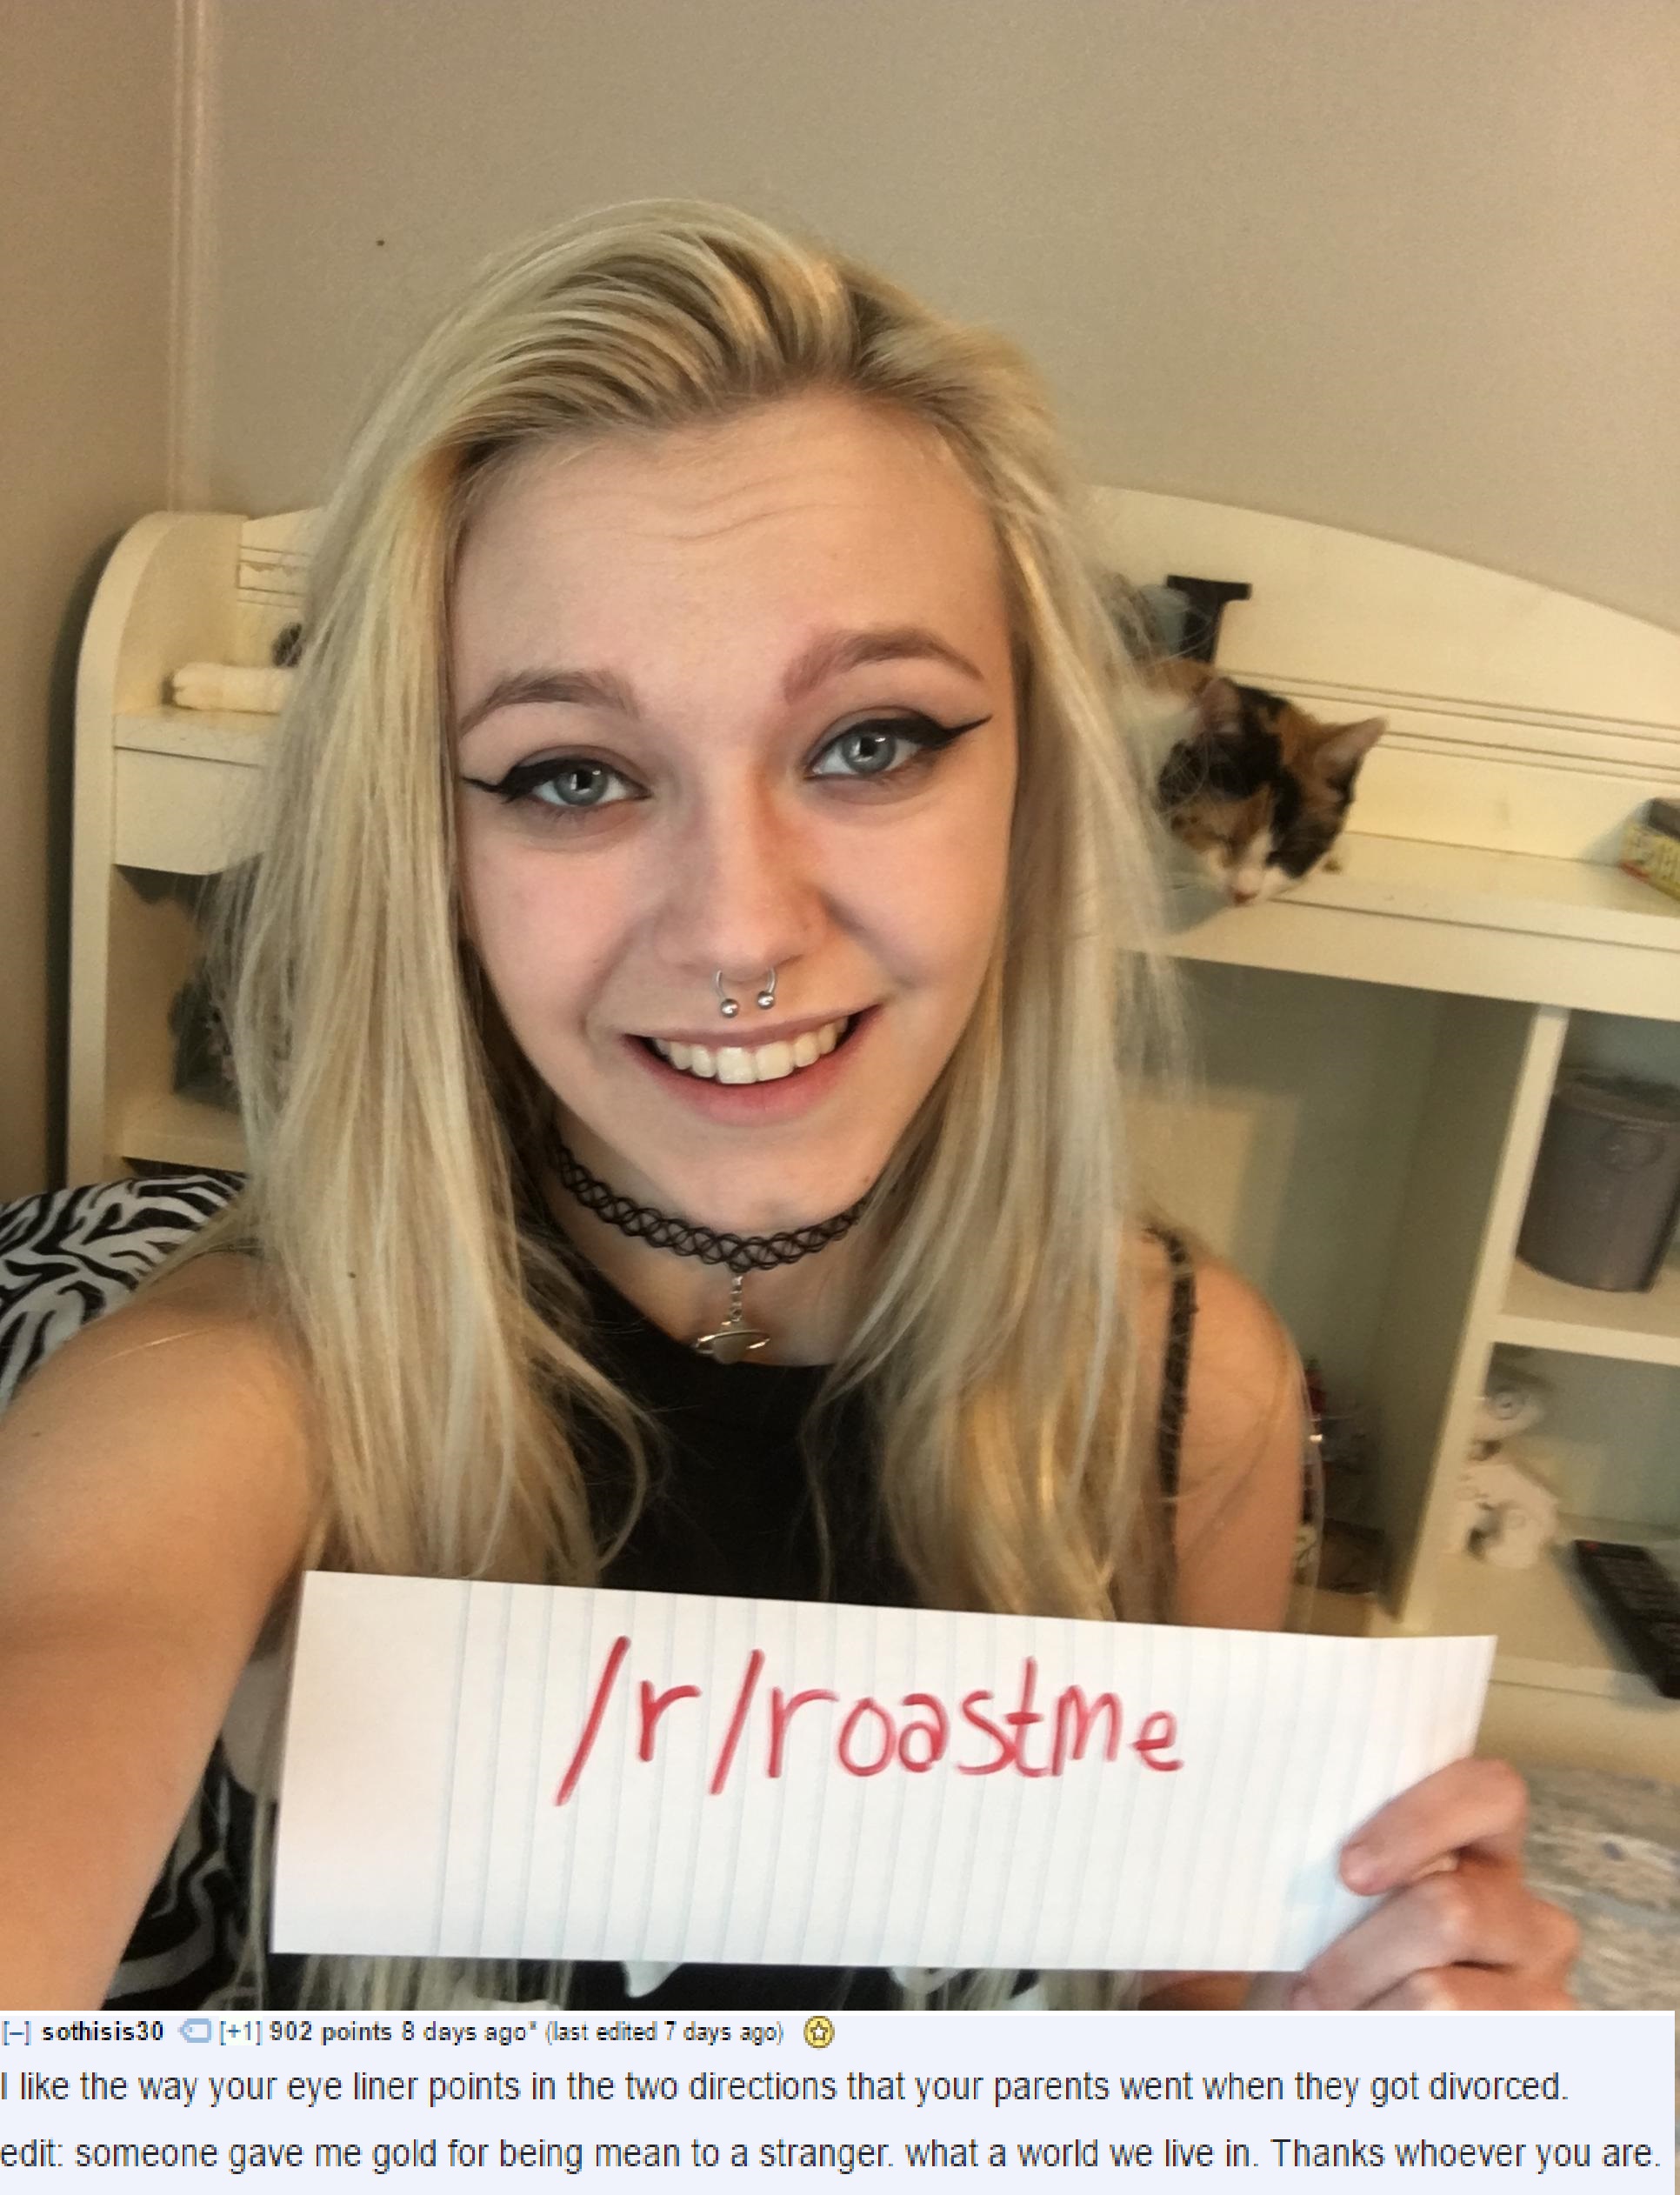 clever roasts - rroastme 10 1907 p o day ago the way your eyeliner points in the two directions that your parents went when they got divorced odit someone gave me gold for being mean to a stranger what a world we live in Thanks whoever you are